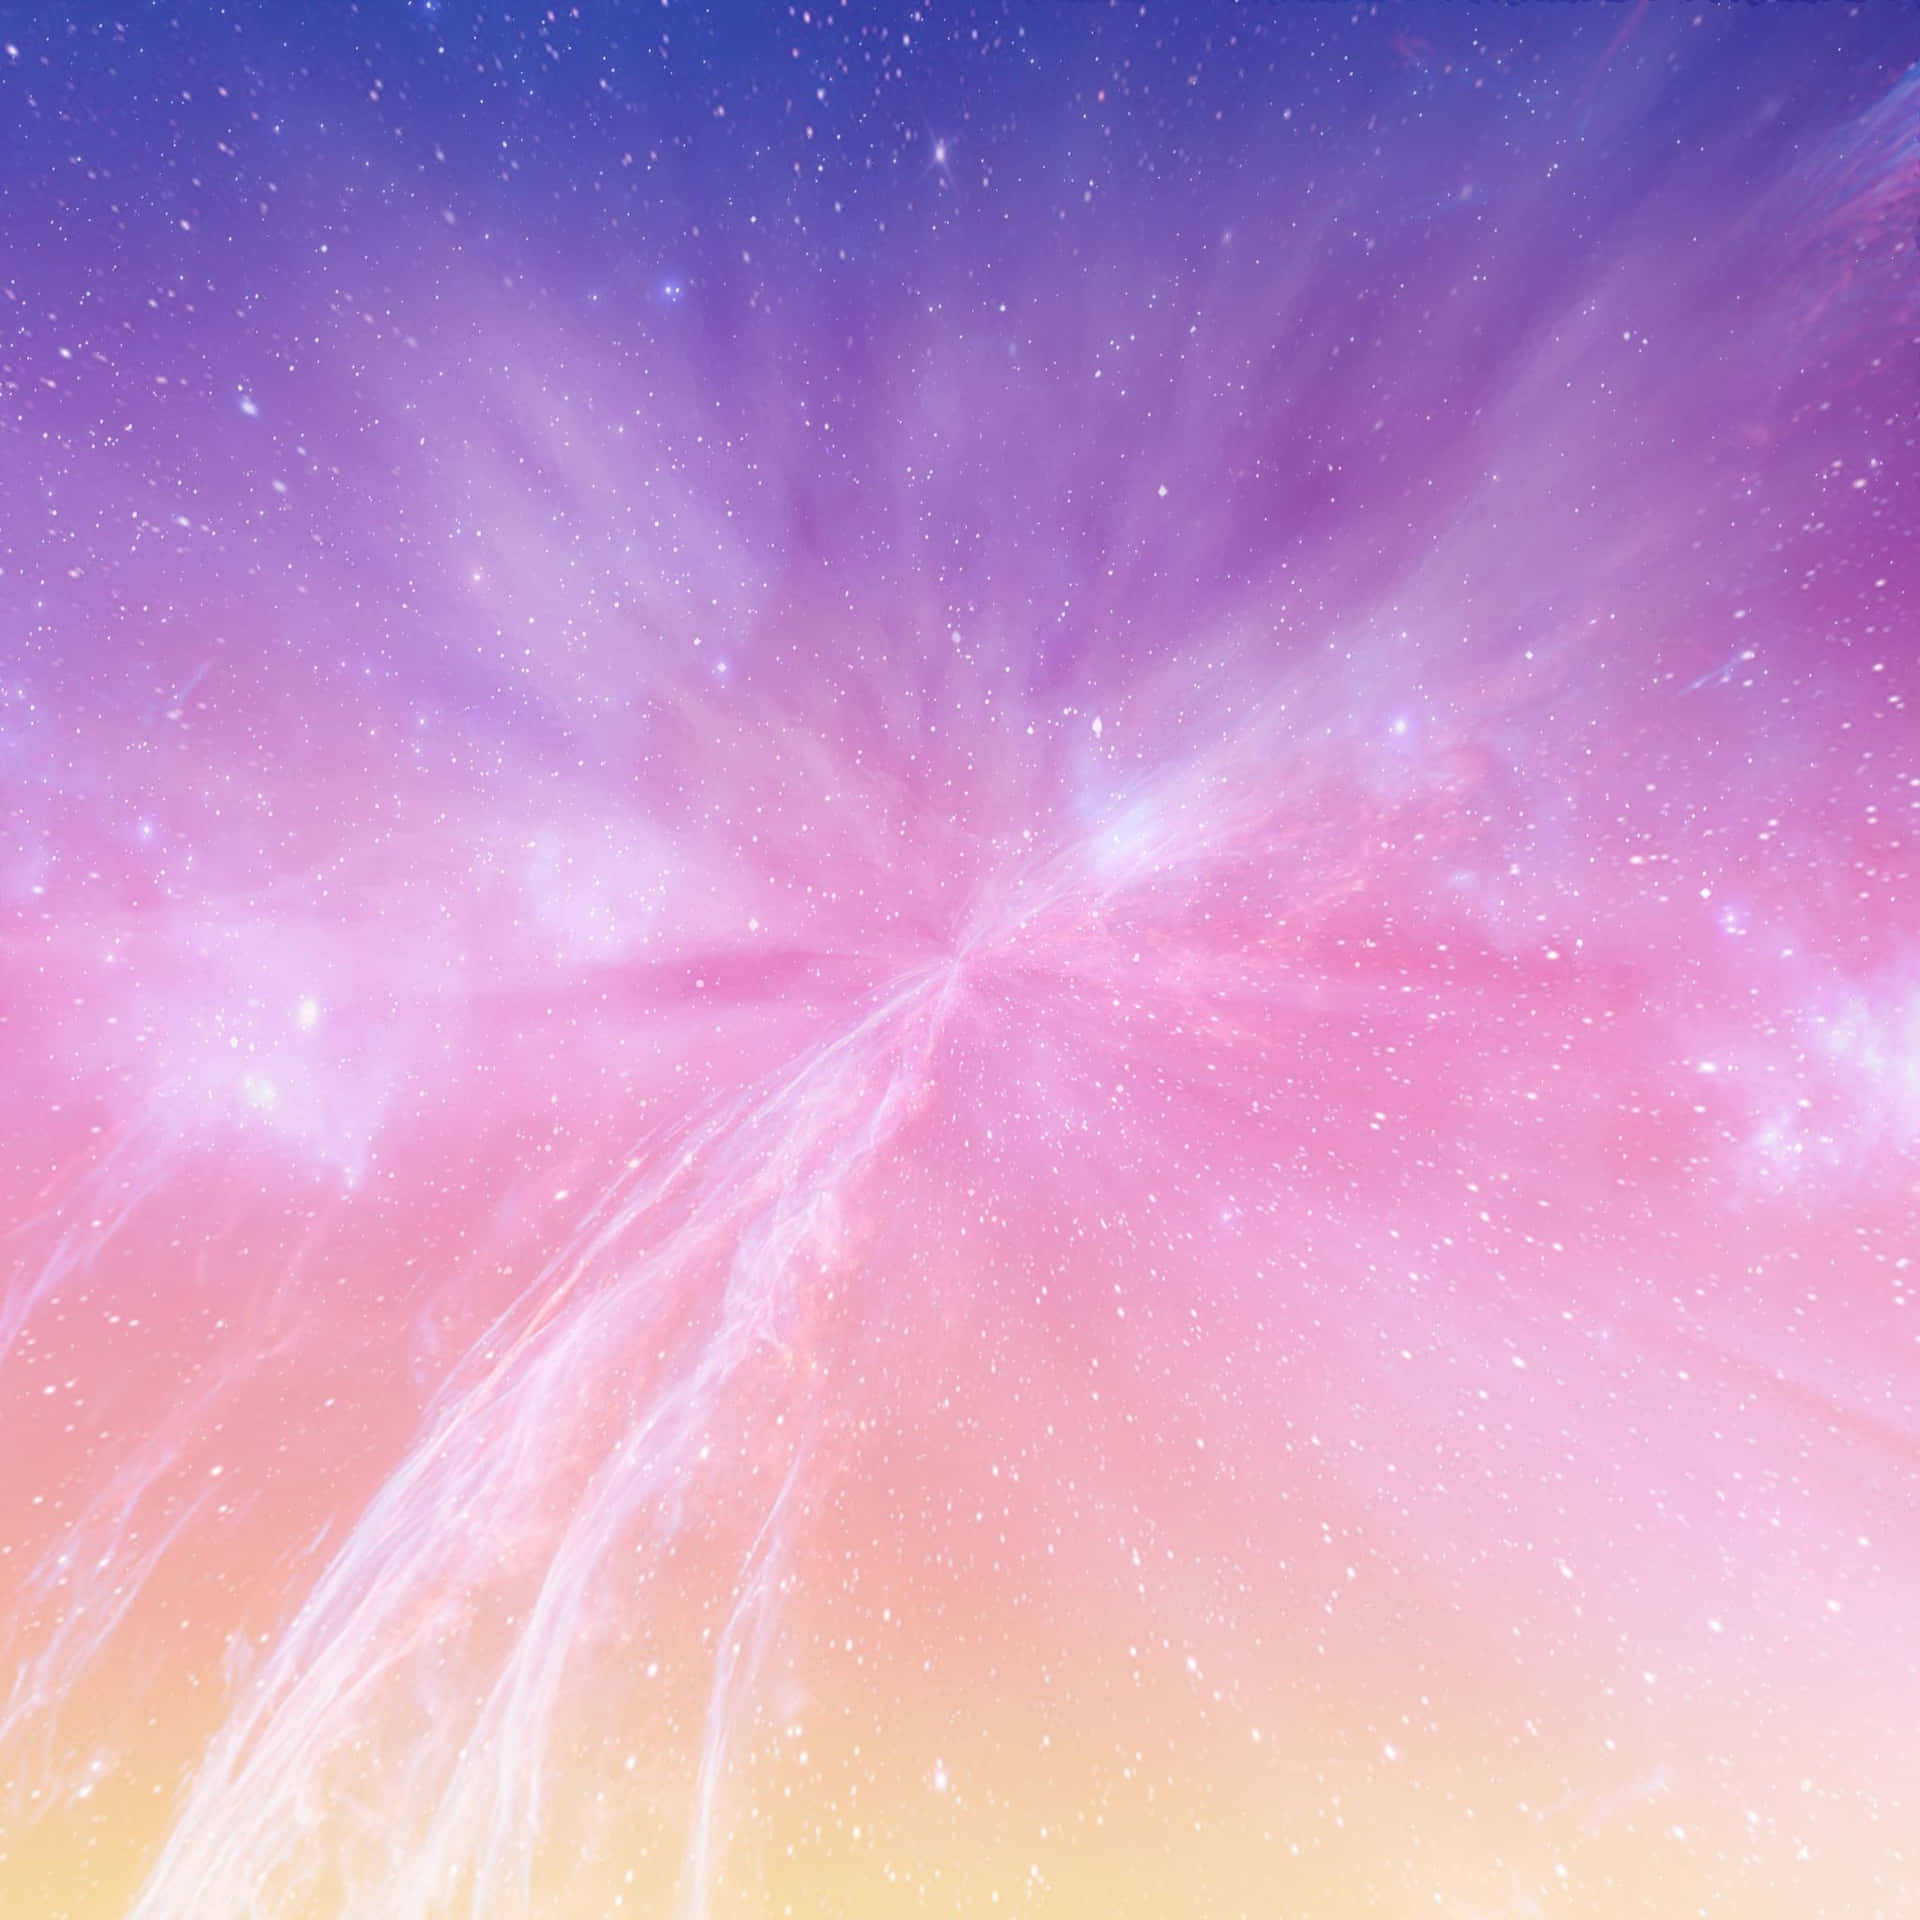 Enter a world of beautiful pastels and explore the Cute Pastel Galaxy Wallpaper